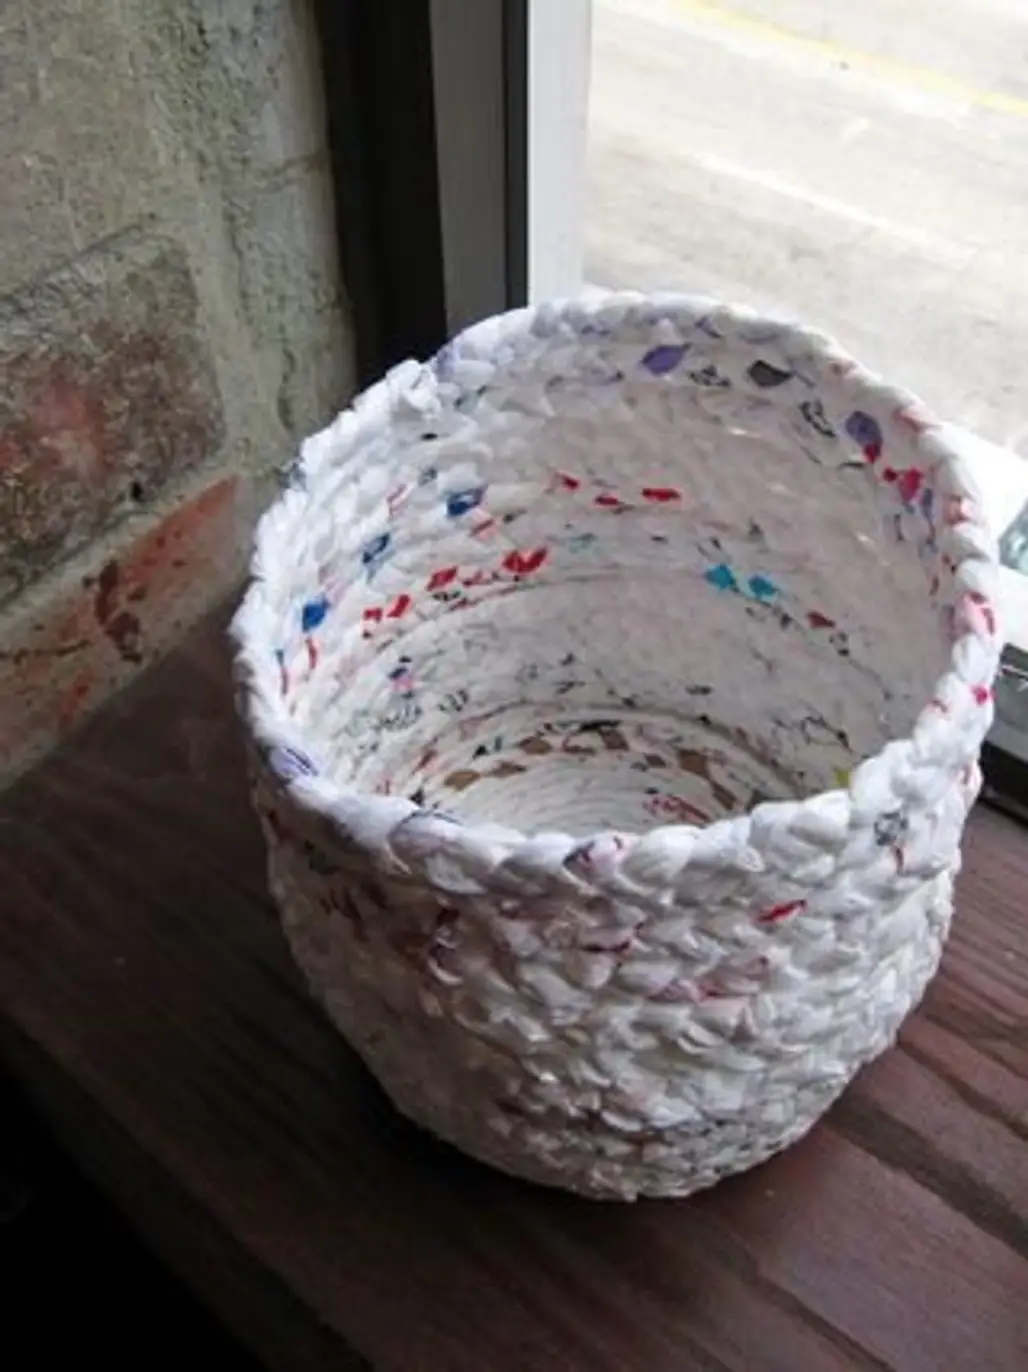 Up-cycle Your Plastic Bags into Baskets